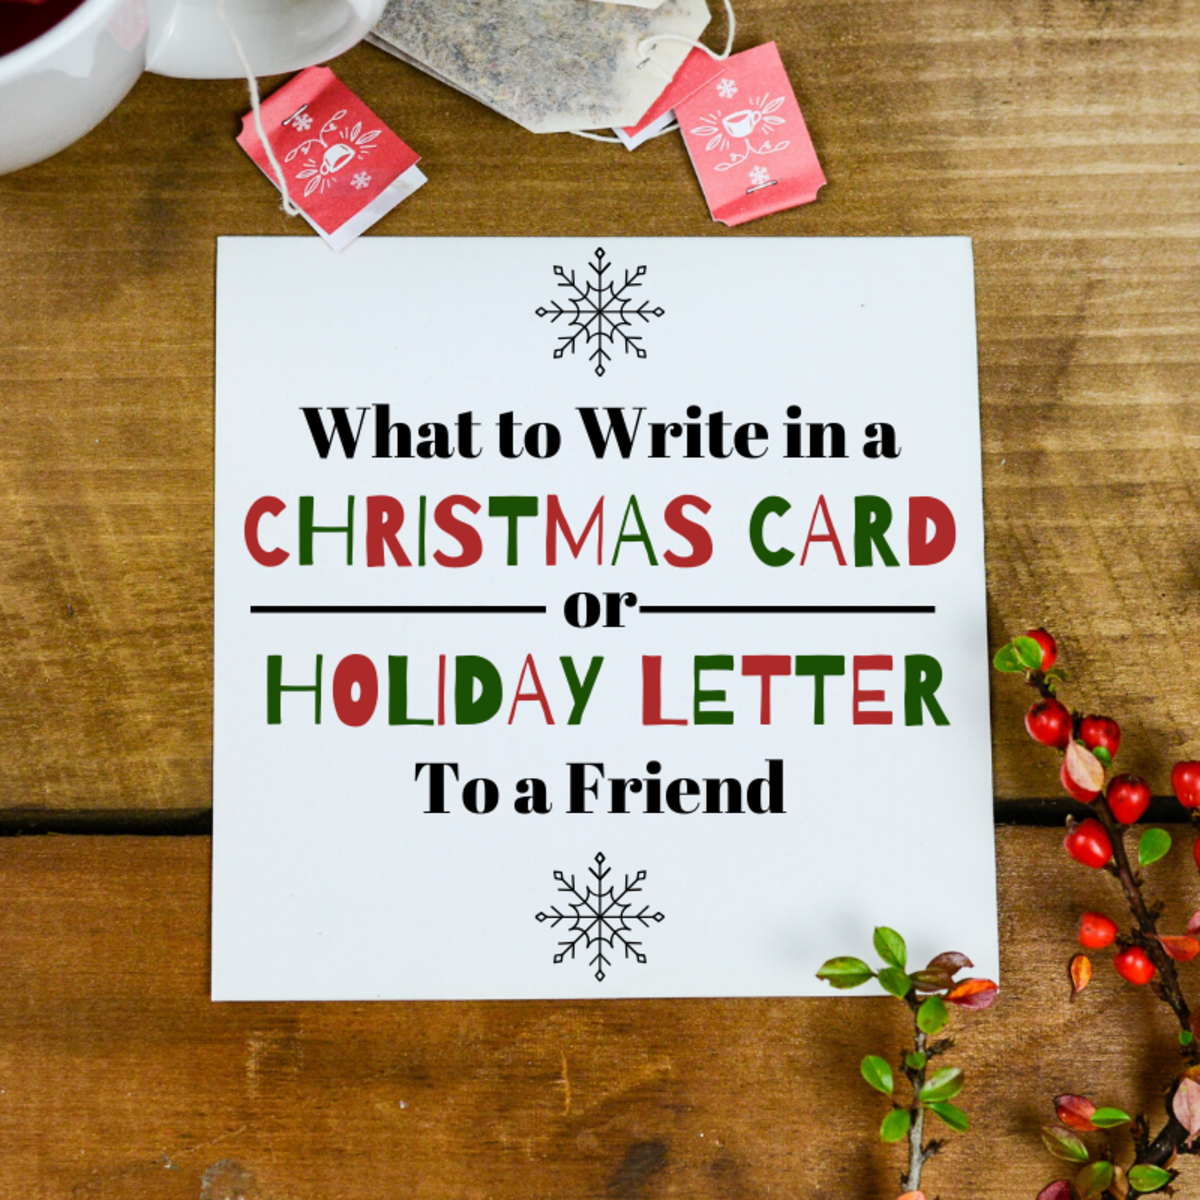 4-fun-ideas-for-creative-christmas-letters-holidappy